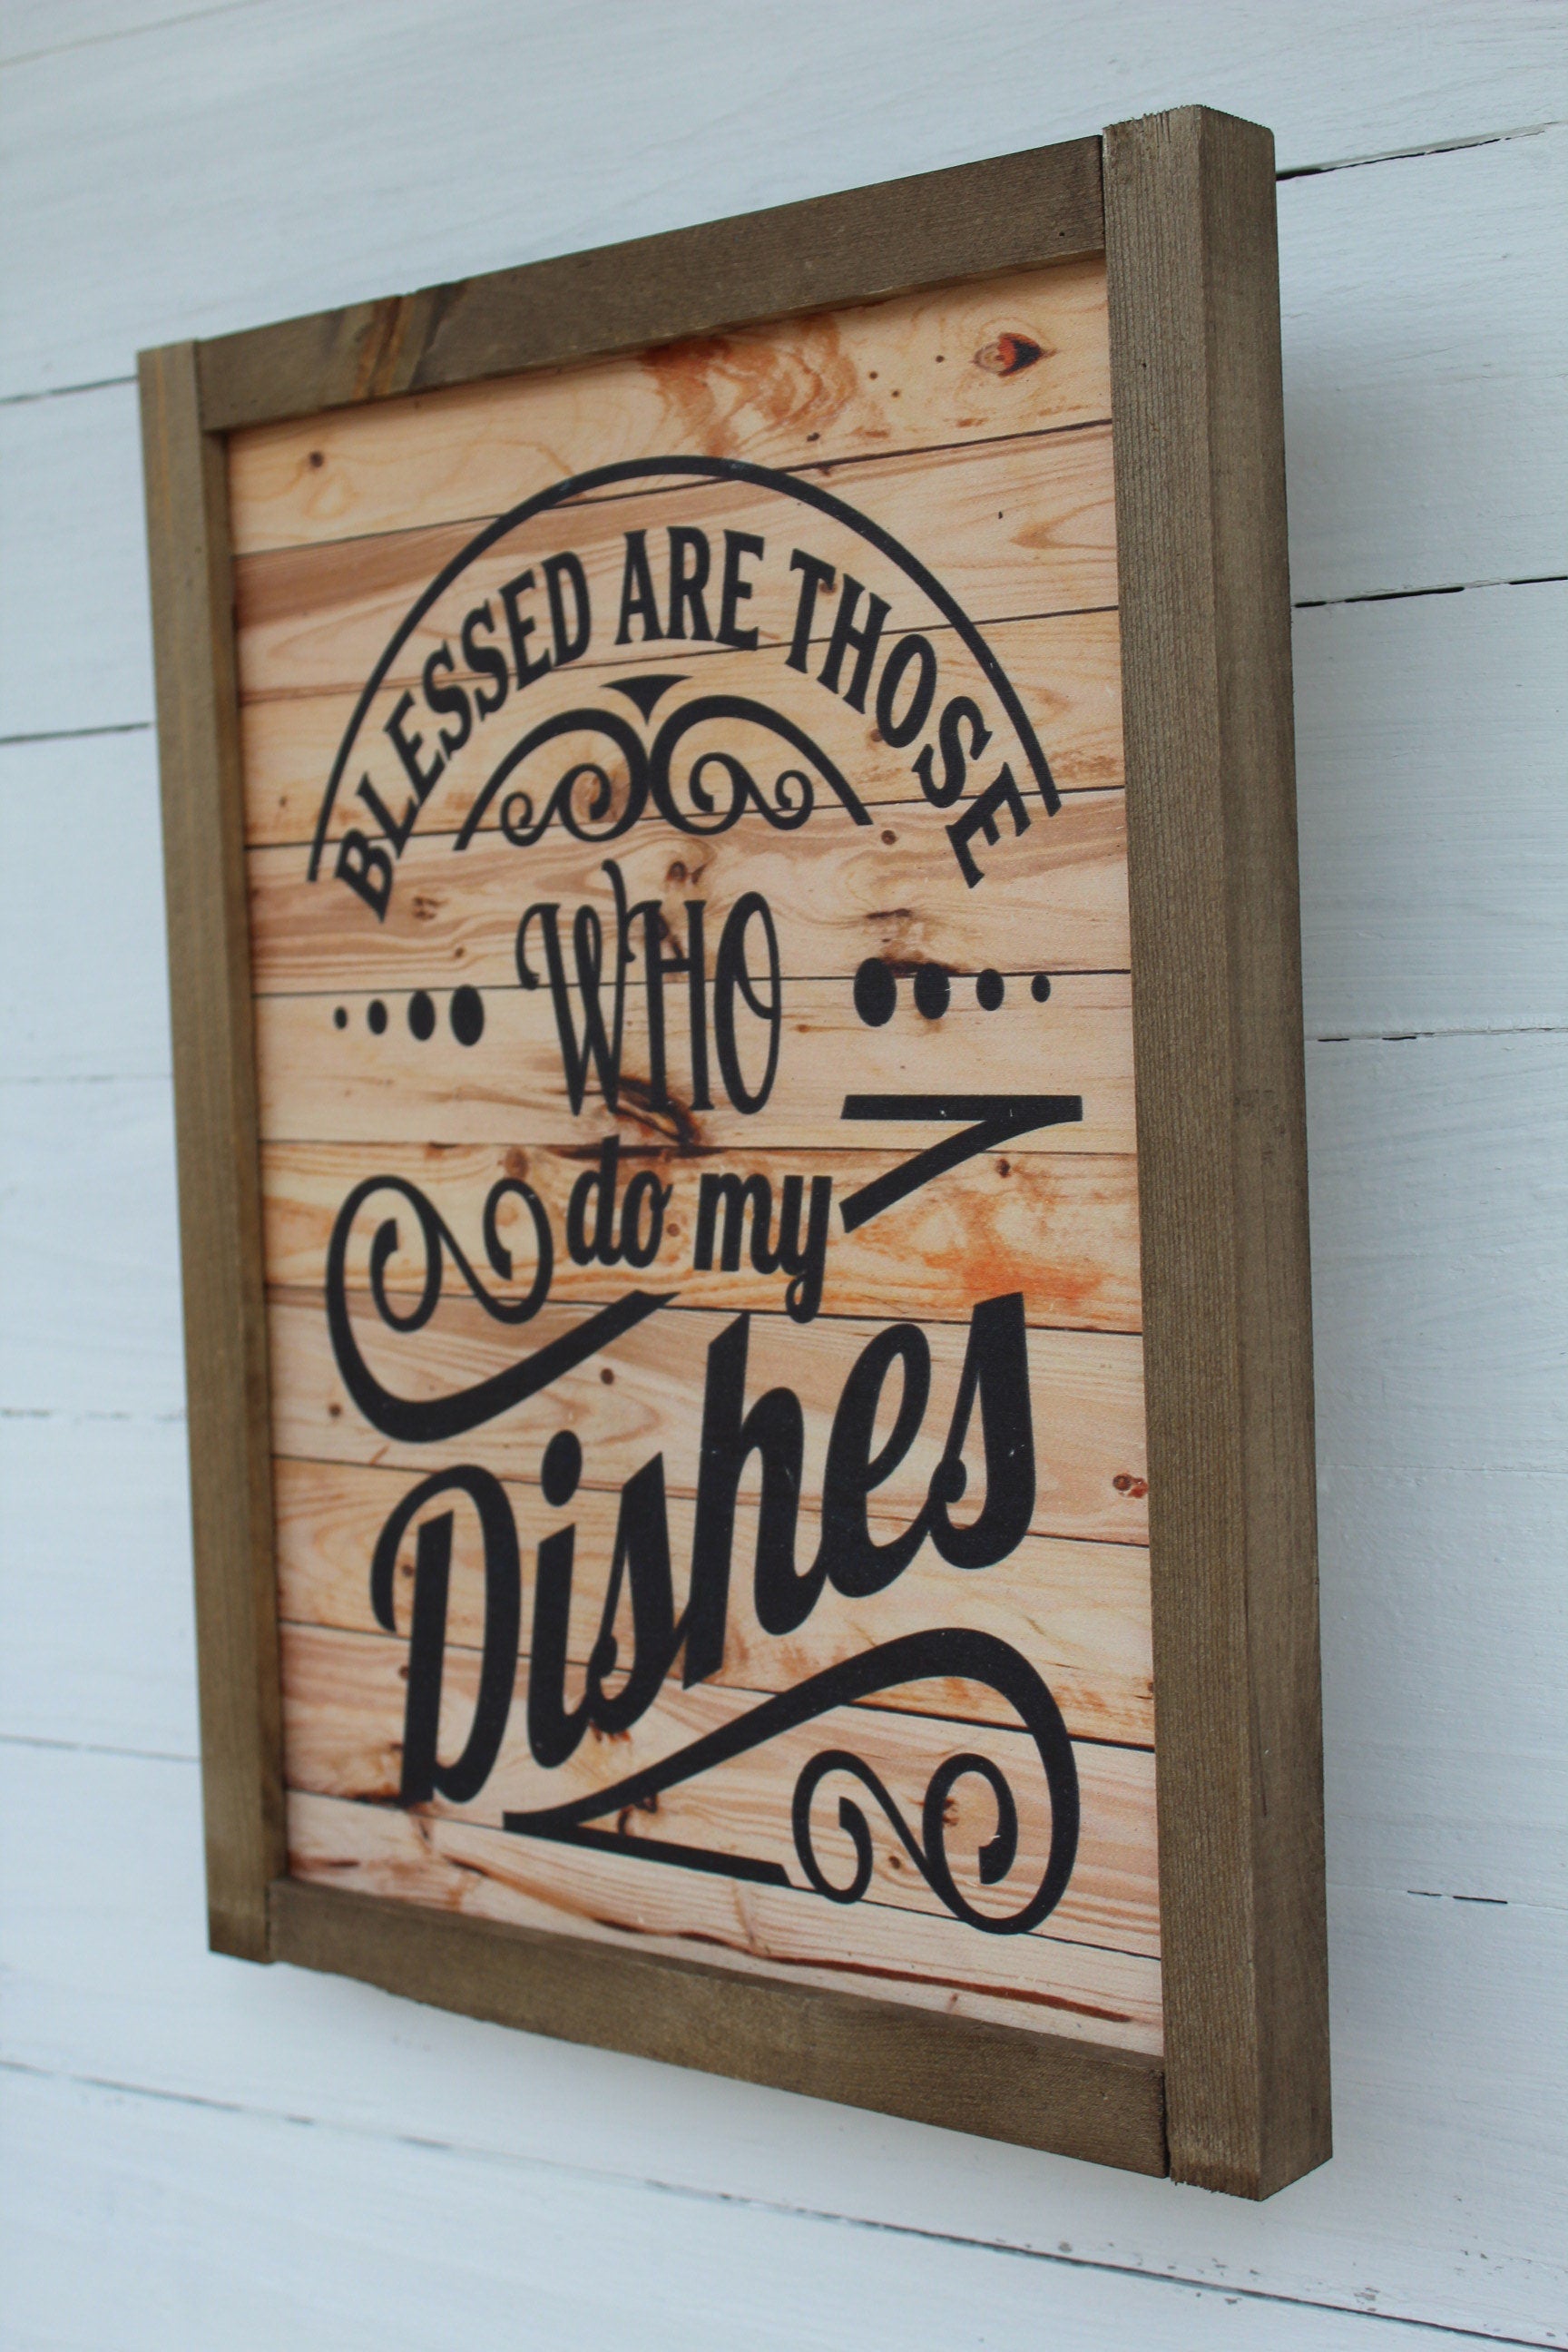 Blessed Are Those Who Do My Dishes Funny Kitchen Sign Rustic Wood